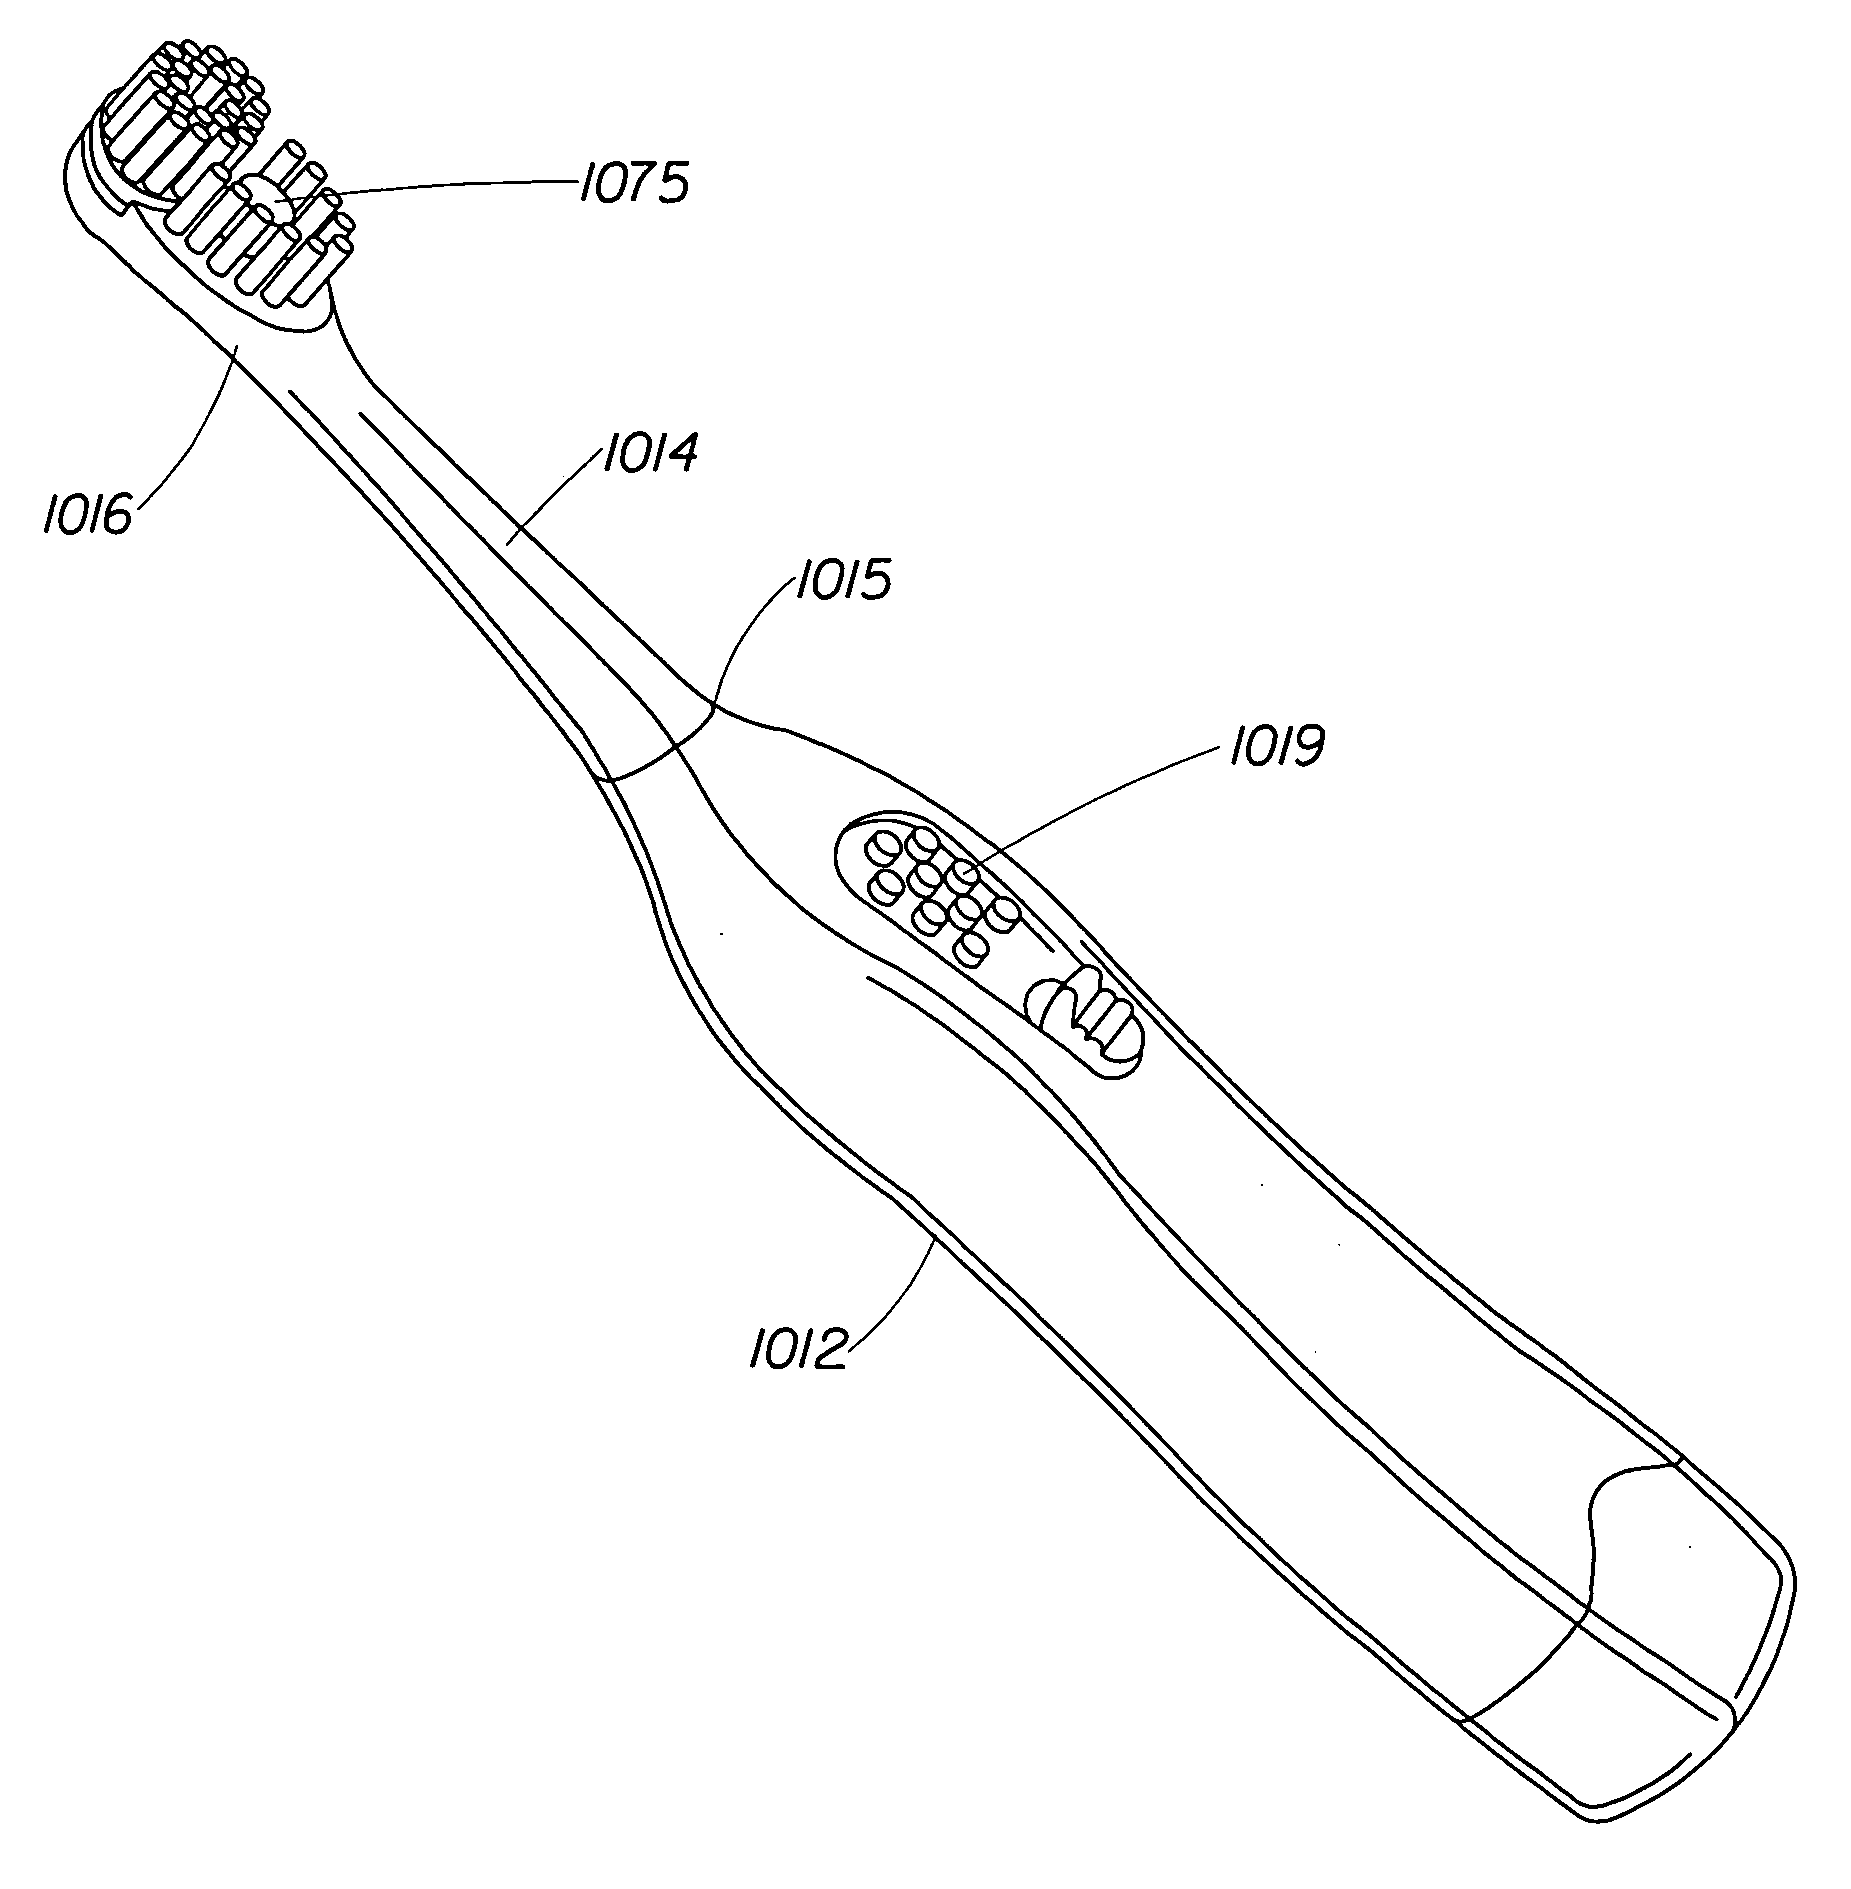 Illuminated electric toothbrushes and methods of use